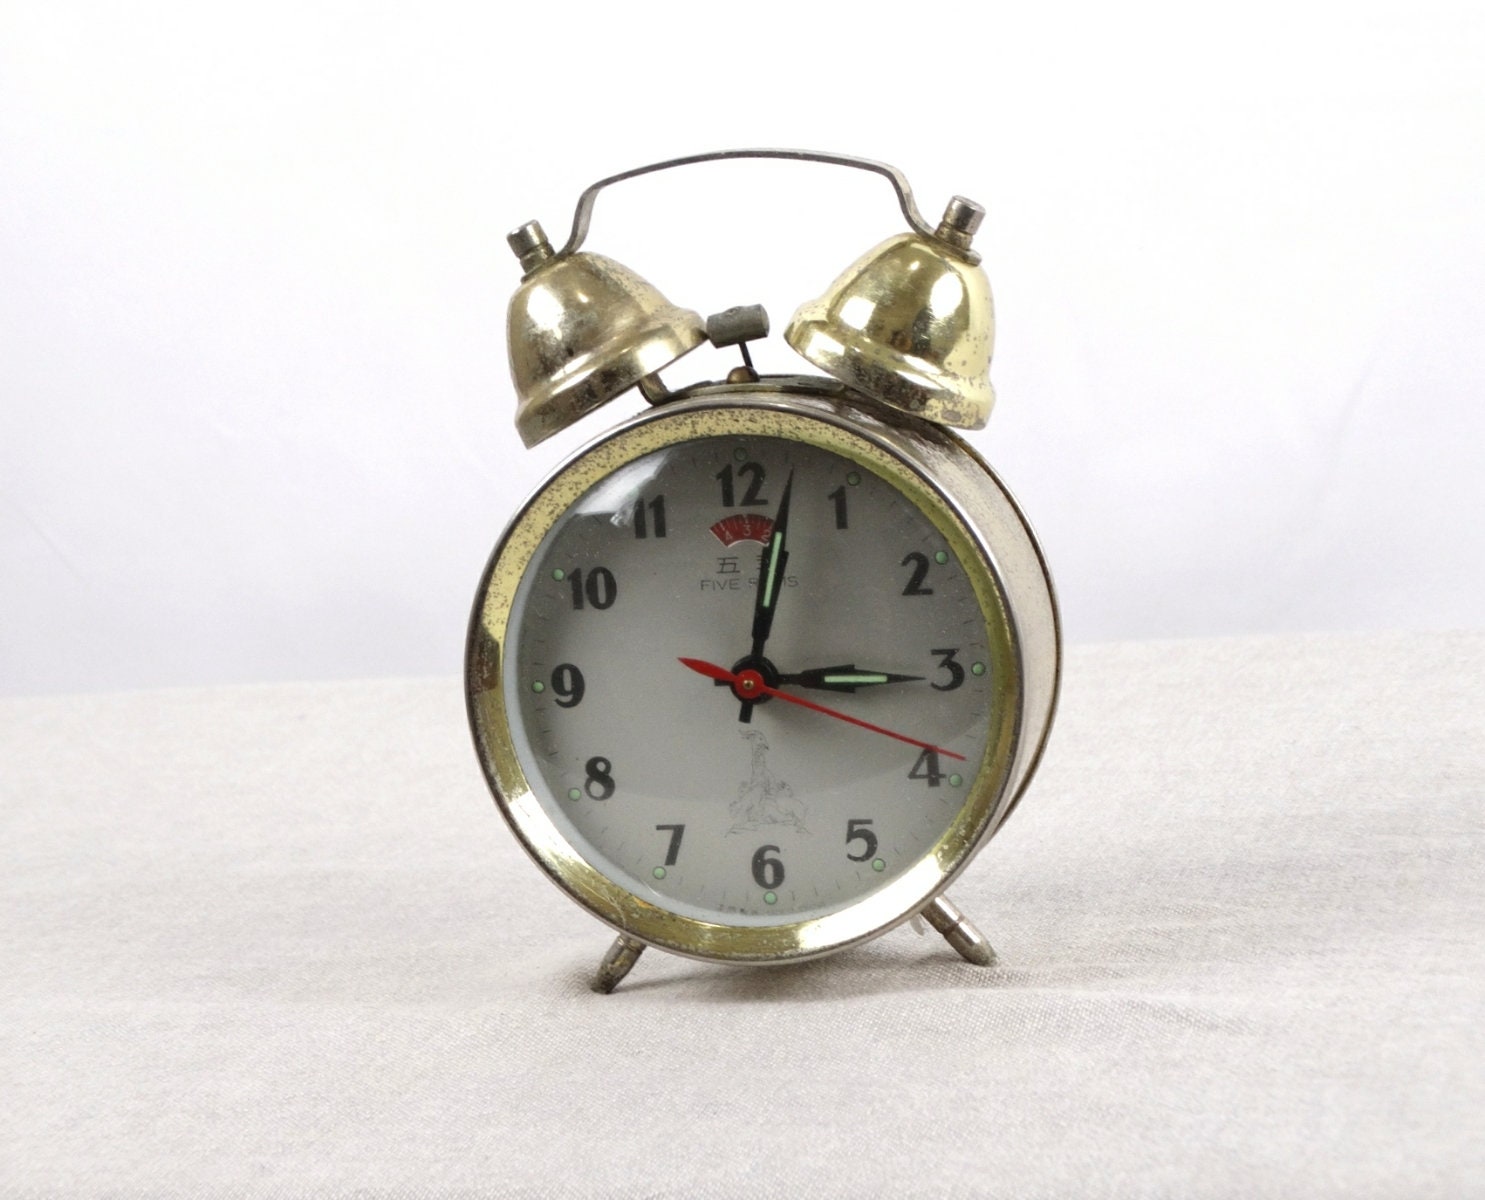 Five Rams Clock, Old Bell Wind Up Retro Alarm Office Table Mechanical Bedroom Clock